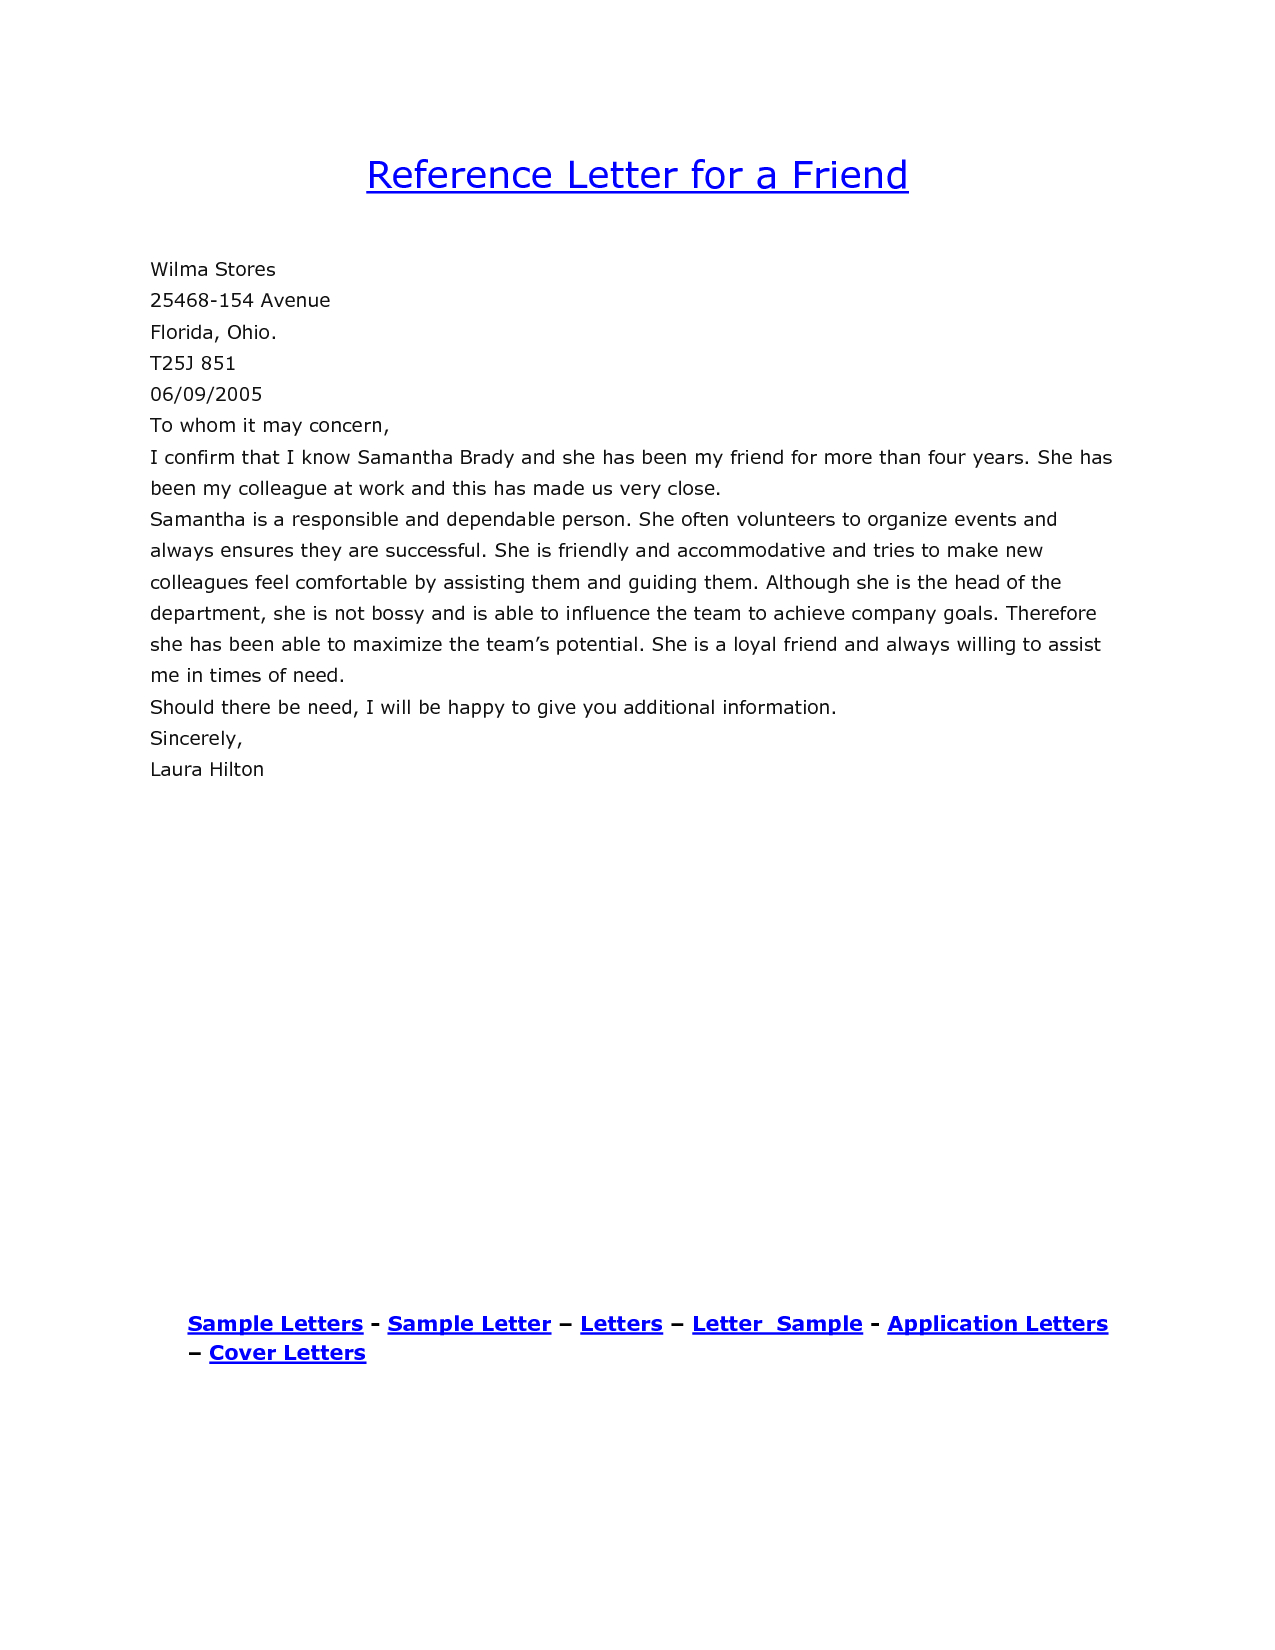 Reference Letter Sample For A Friend Yahoo Search Results within sizing 1275 X 1650